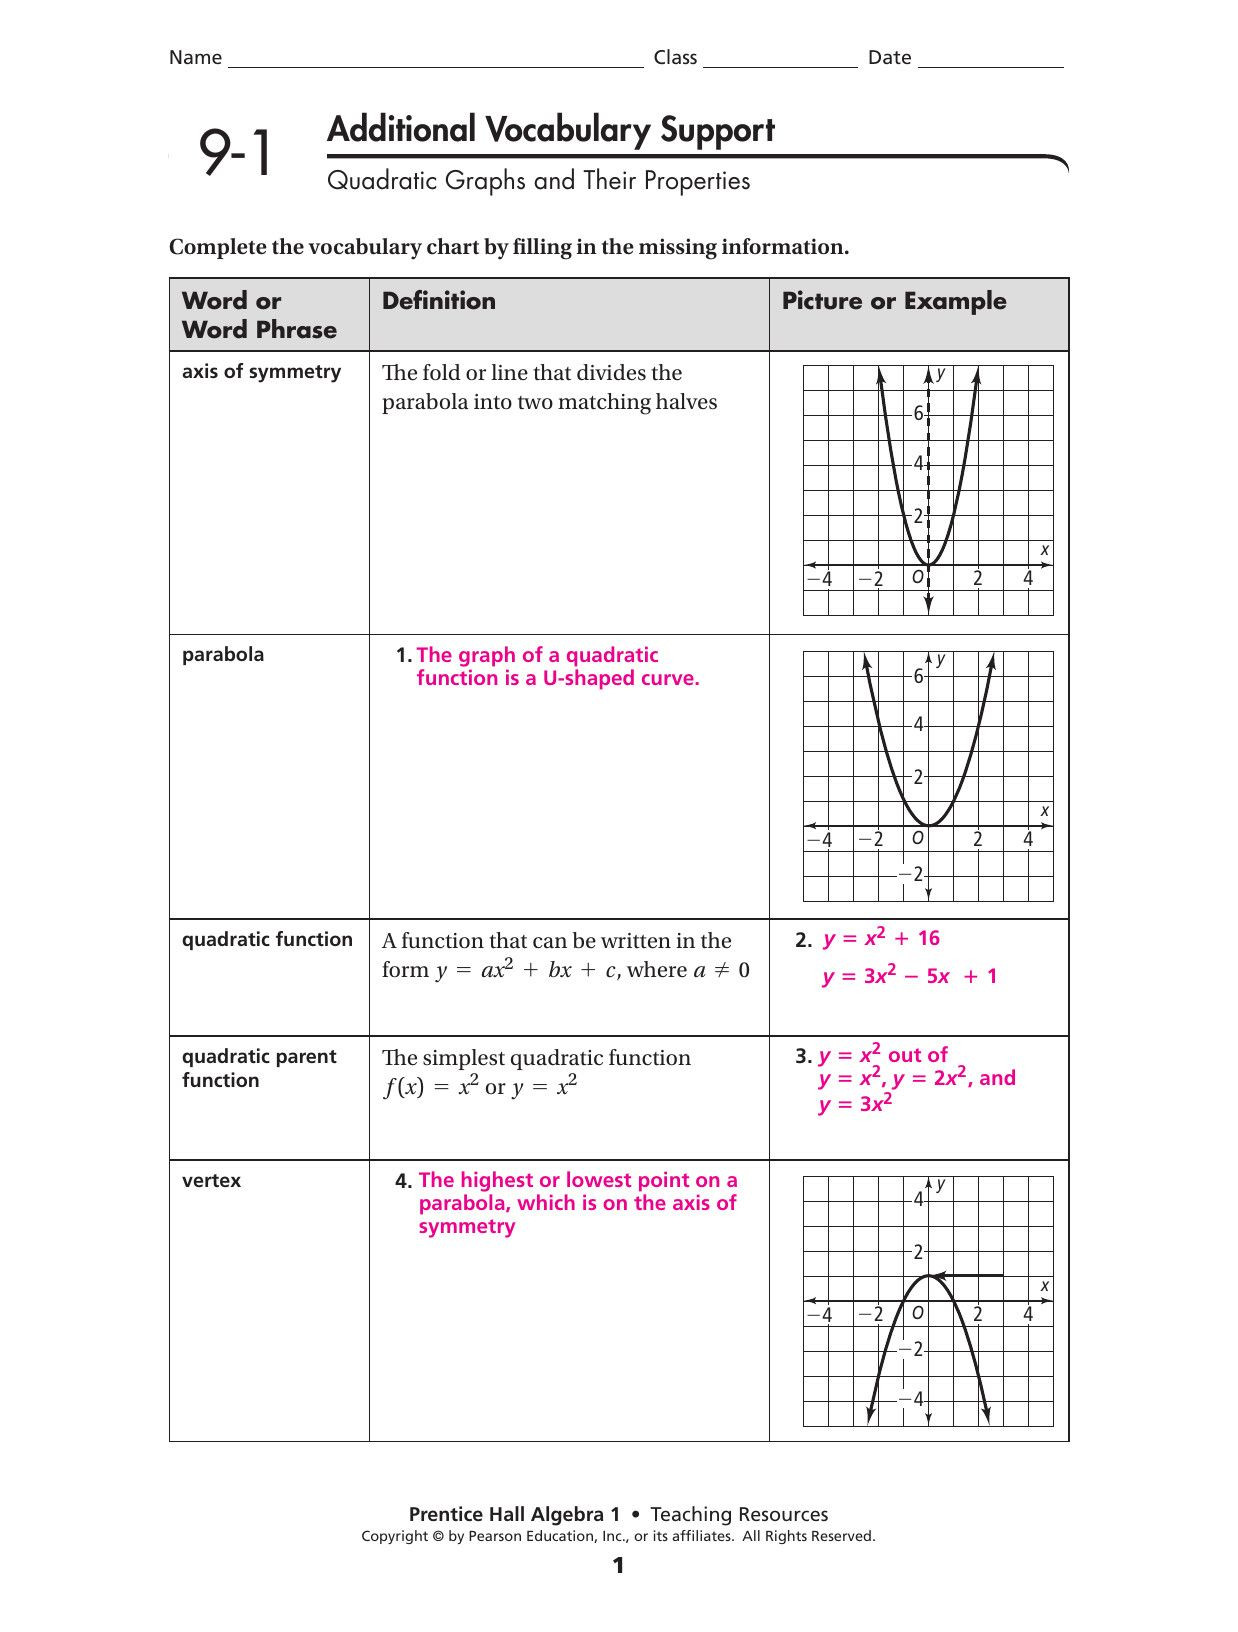 Quadratic Functions Worksheet with Answers 4 Graphing Quadratic Functions Worksheet Answers Algebra 2